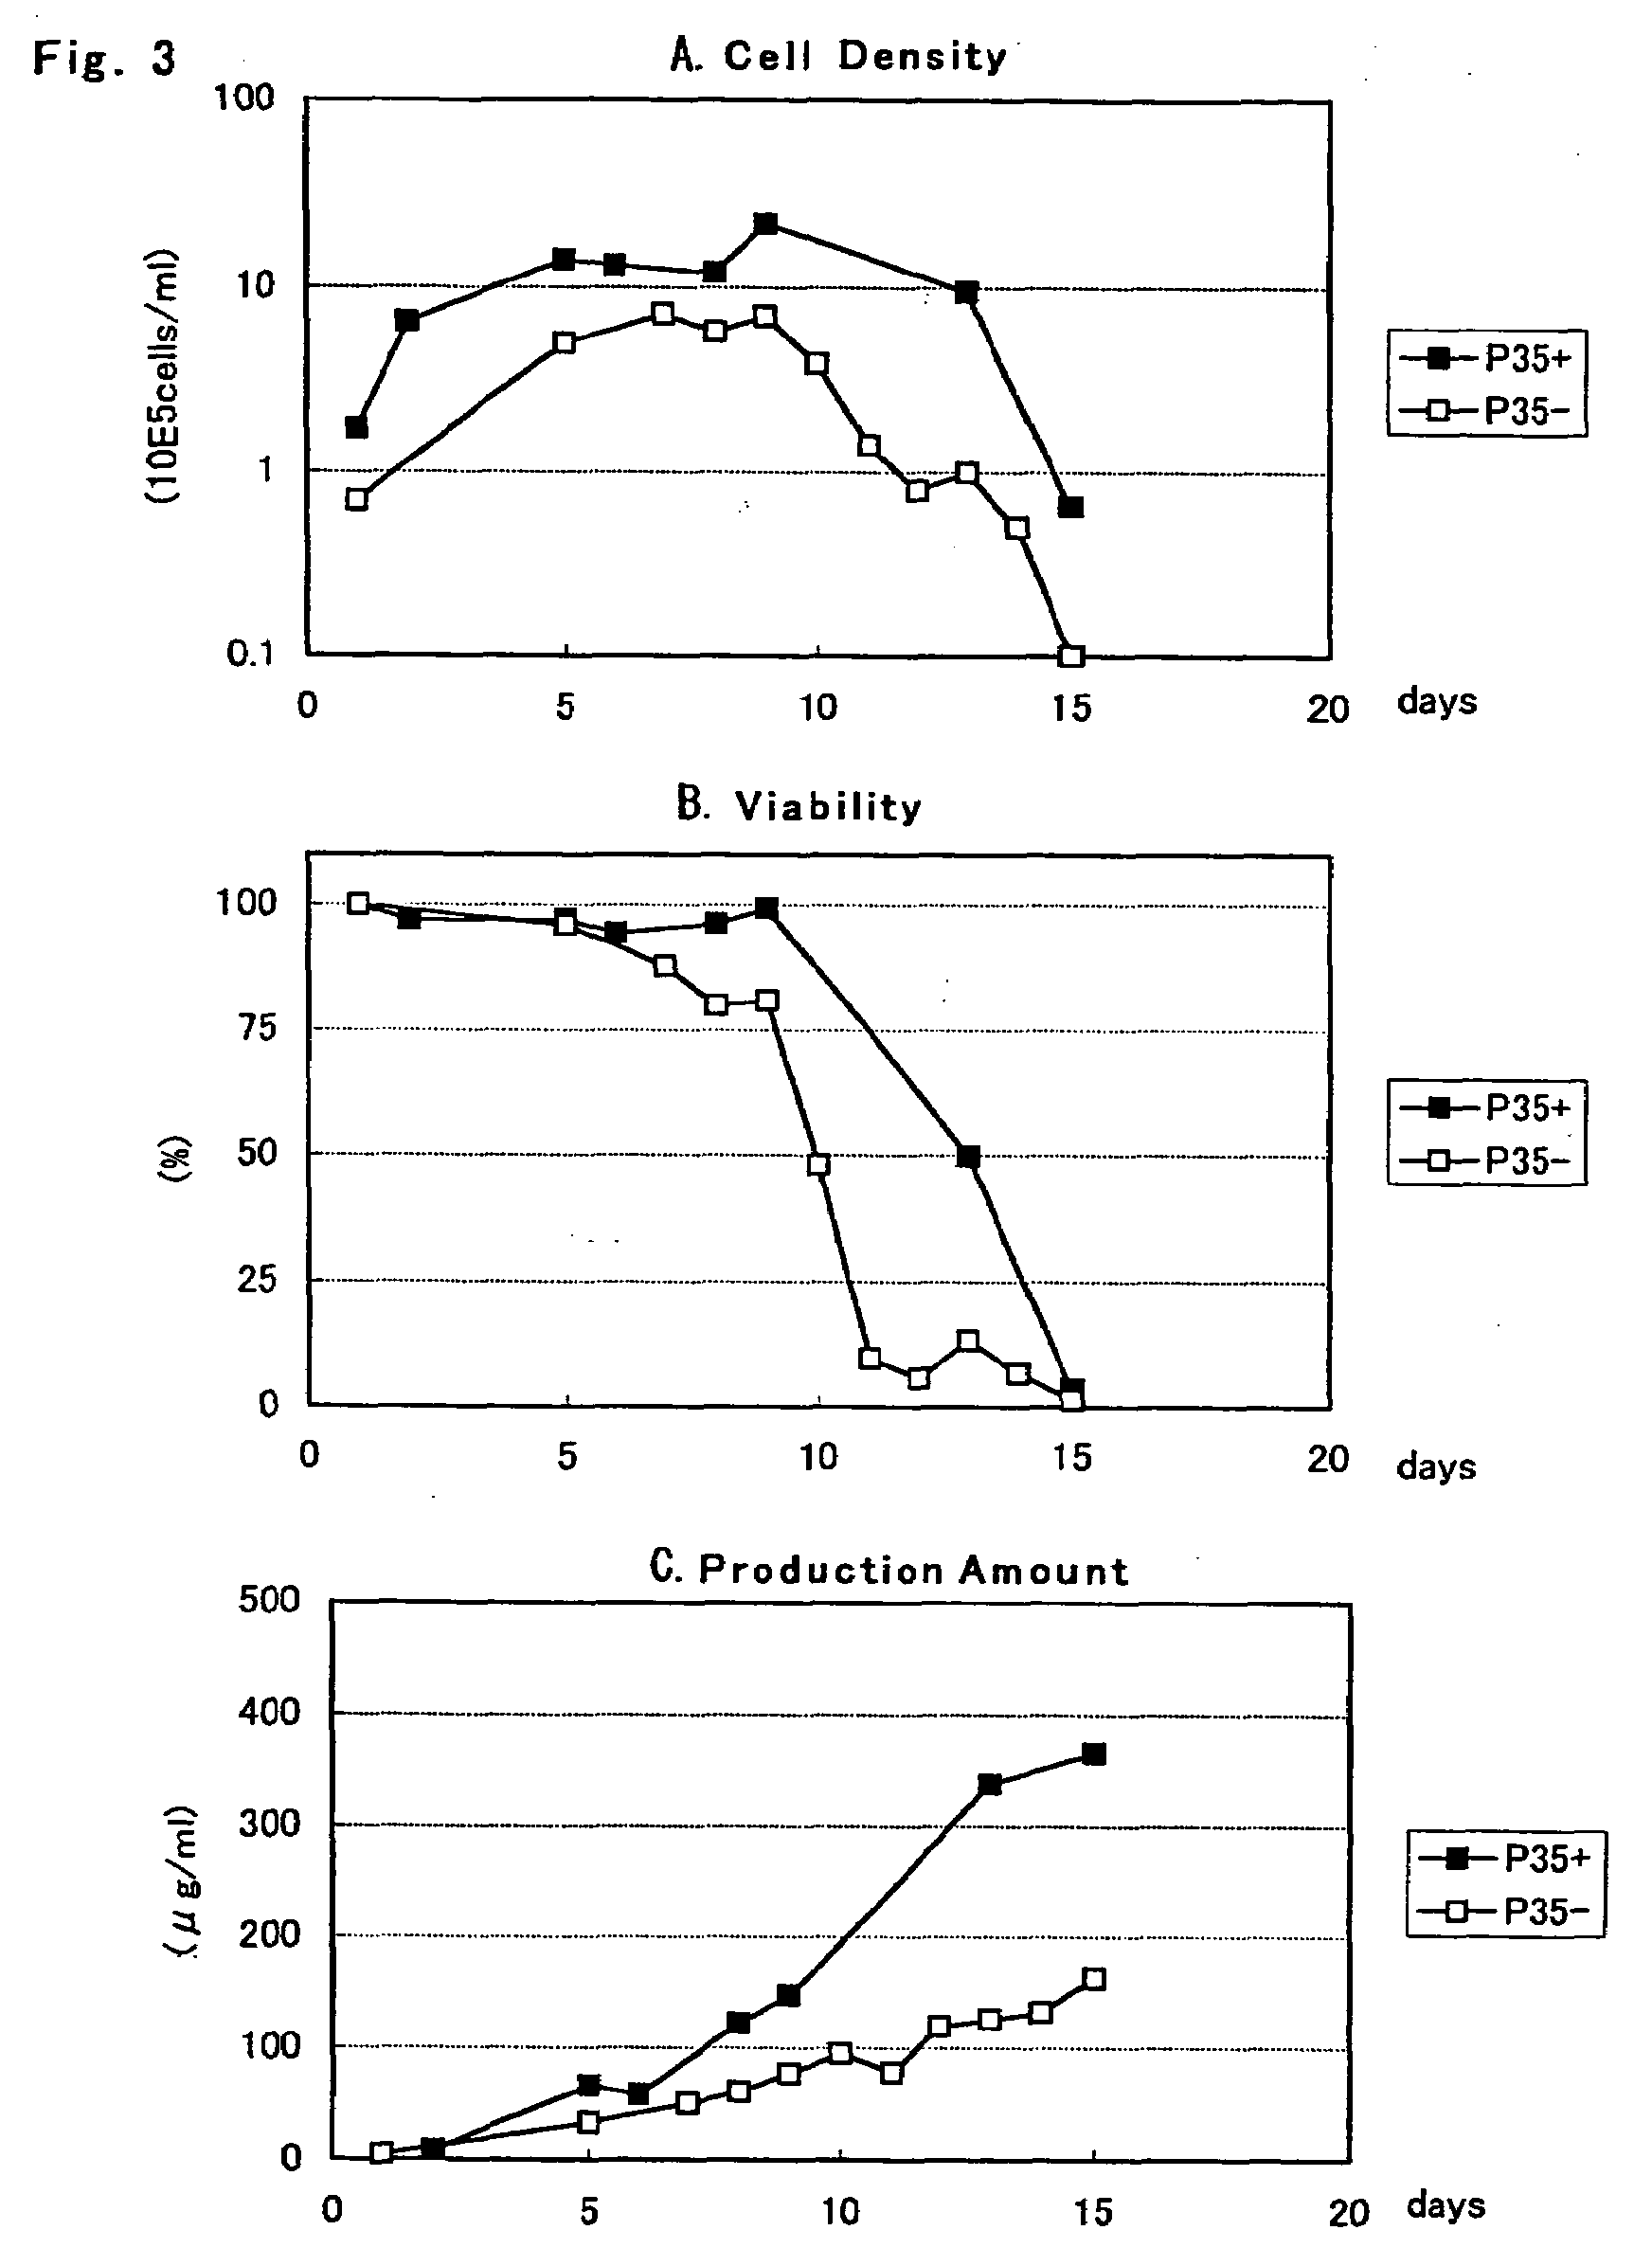 Novel Protein Highly Producing Recombinant Animal Cell, Method for Preparing the Same, and Method for Mass-Producing Protein Using the Same